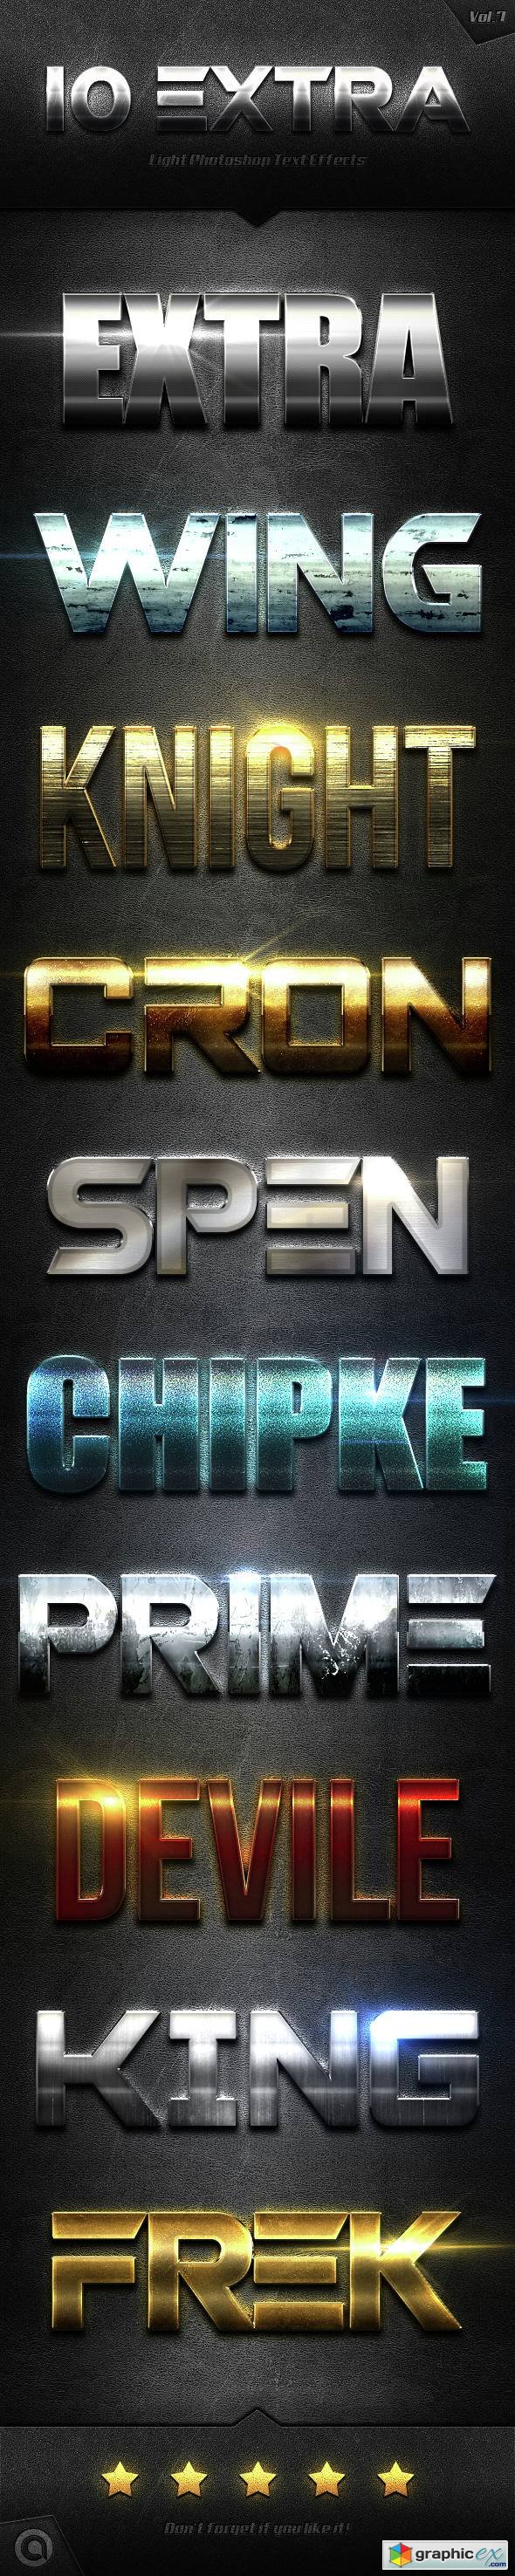 10 Extra Light Text Effects Vol7